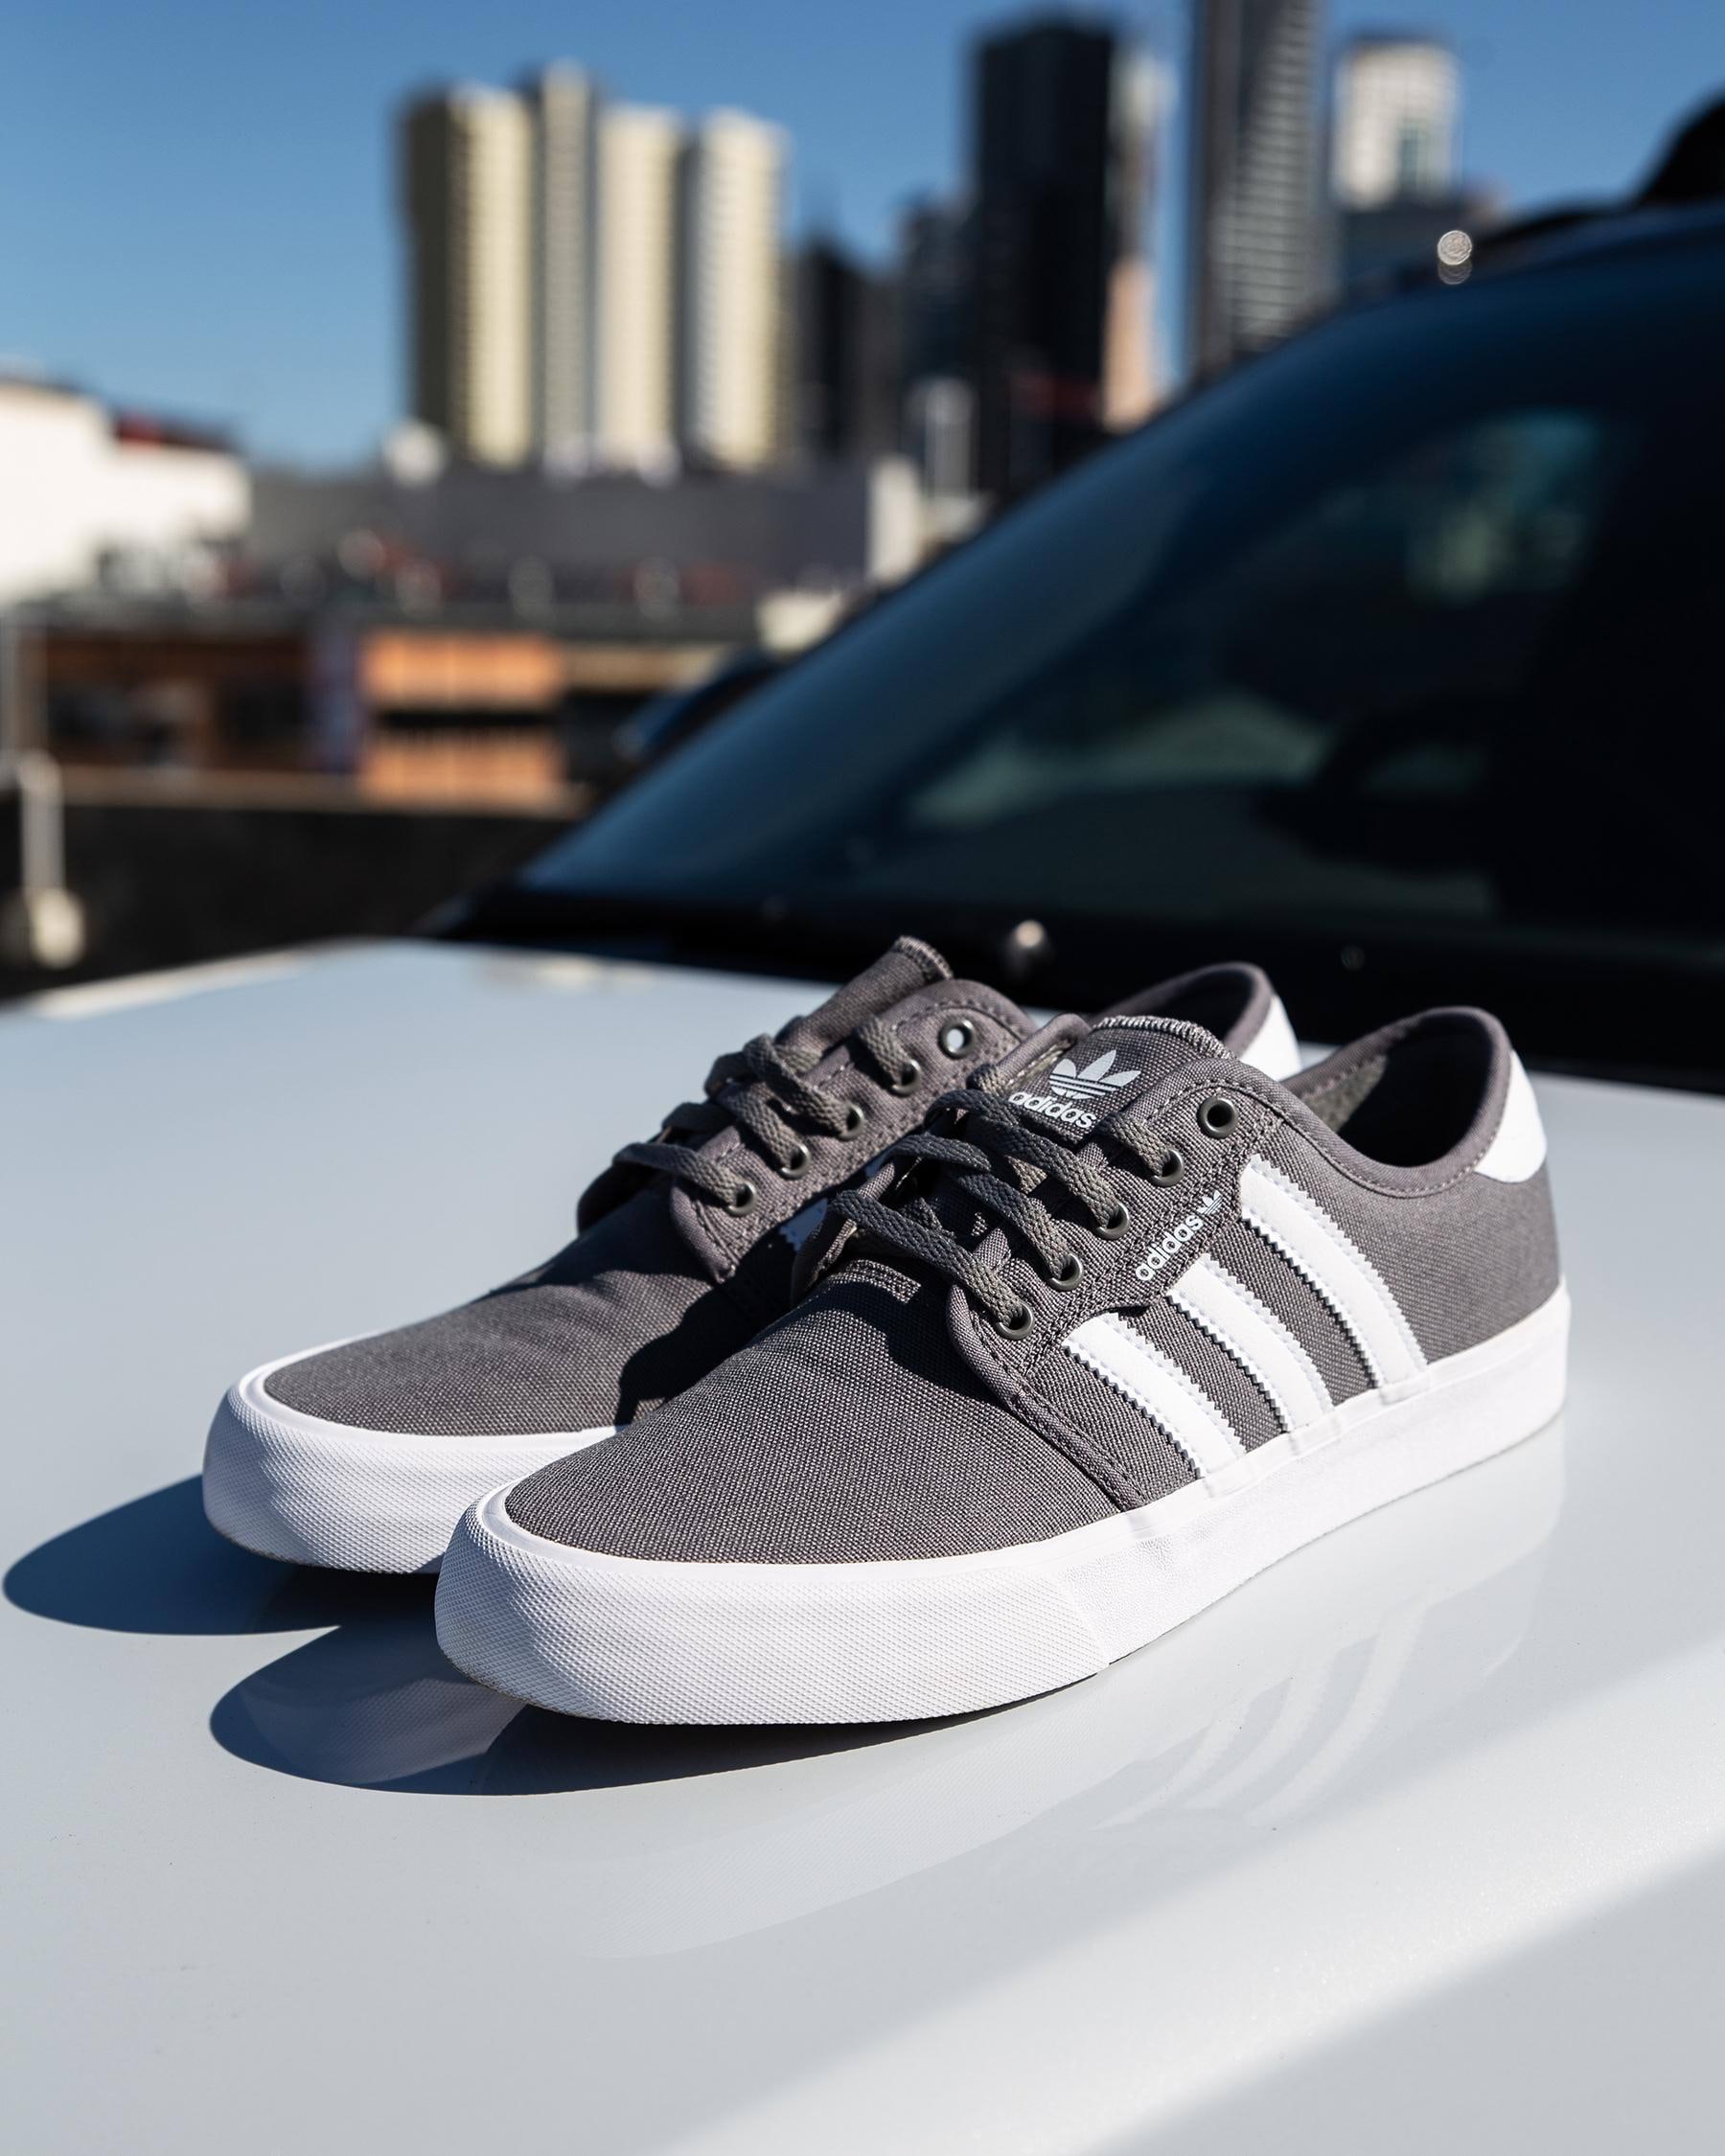 Adidas Seeley XT Shoes In Returns Shipping States United Beach City - Easy - FREE* & Grey/white